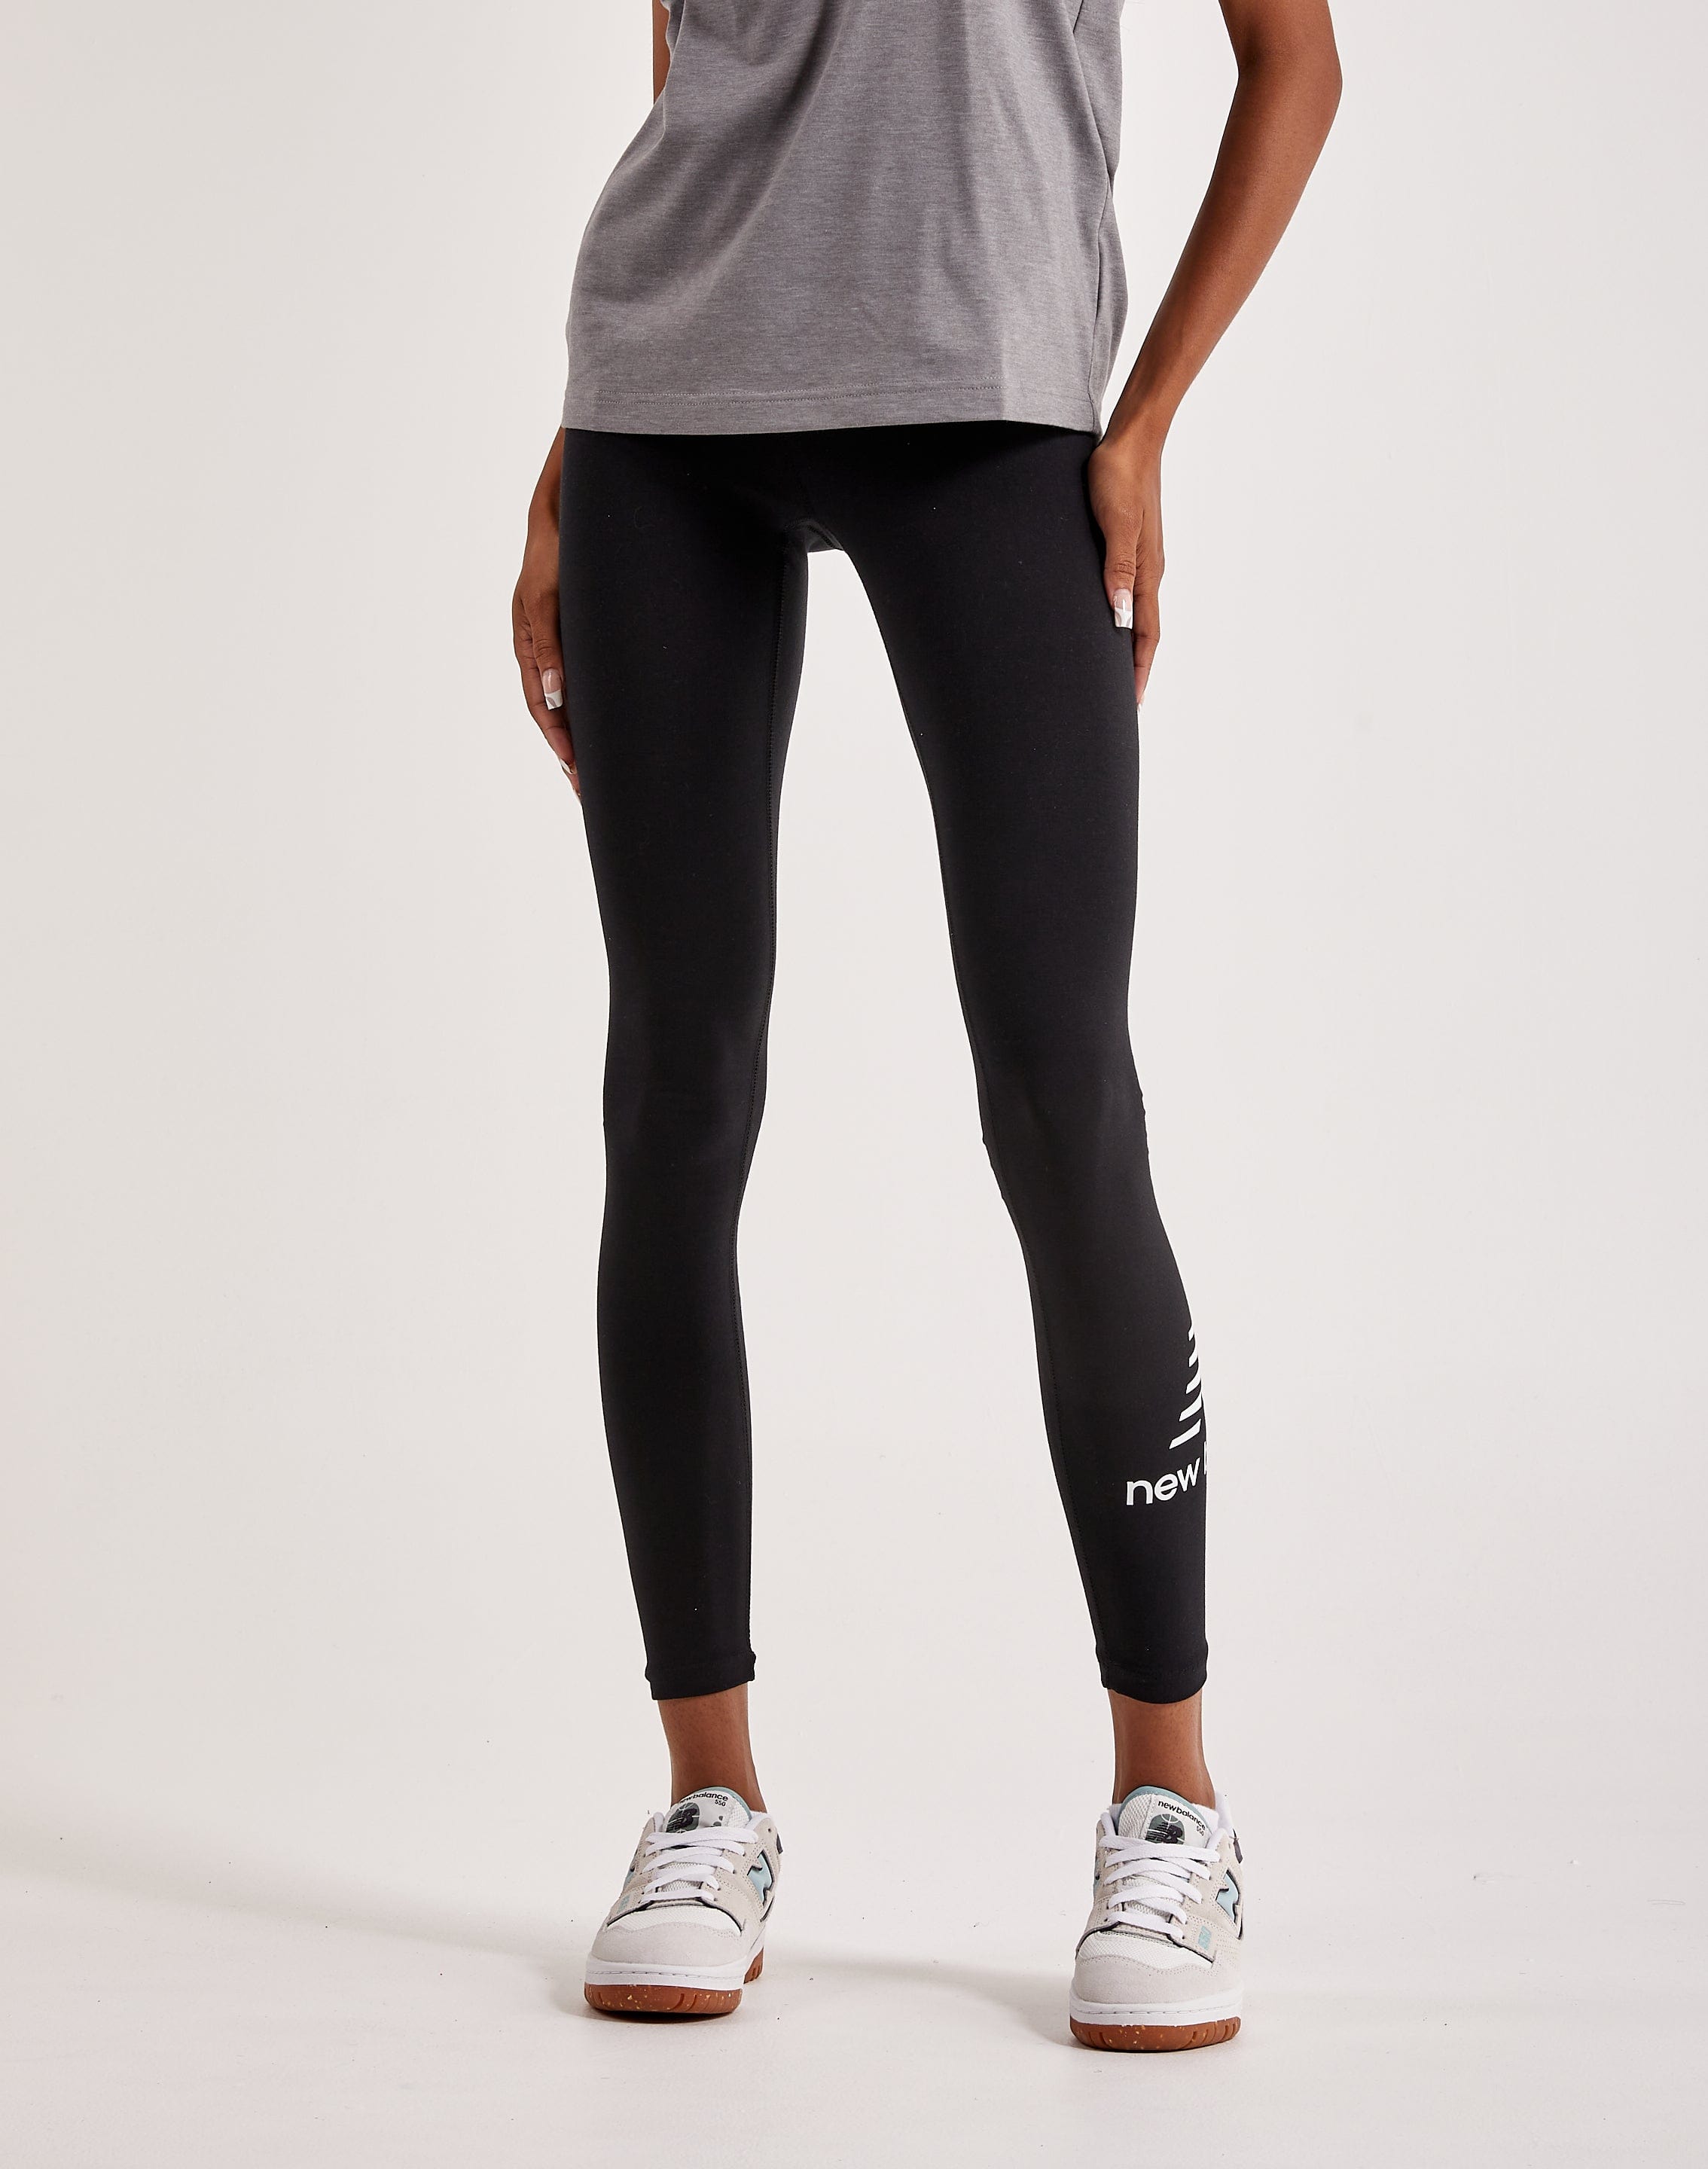 Leggings Essentials – Balance New Stacked DTLR